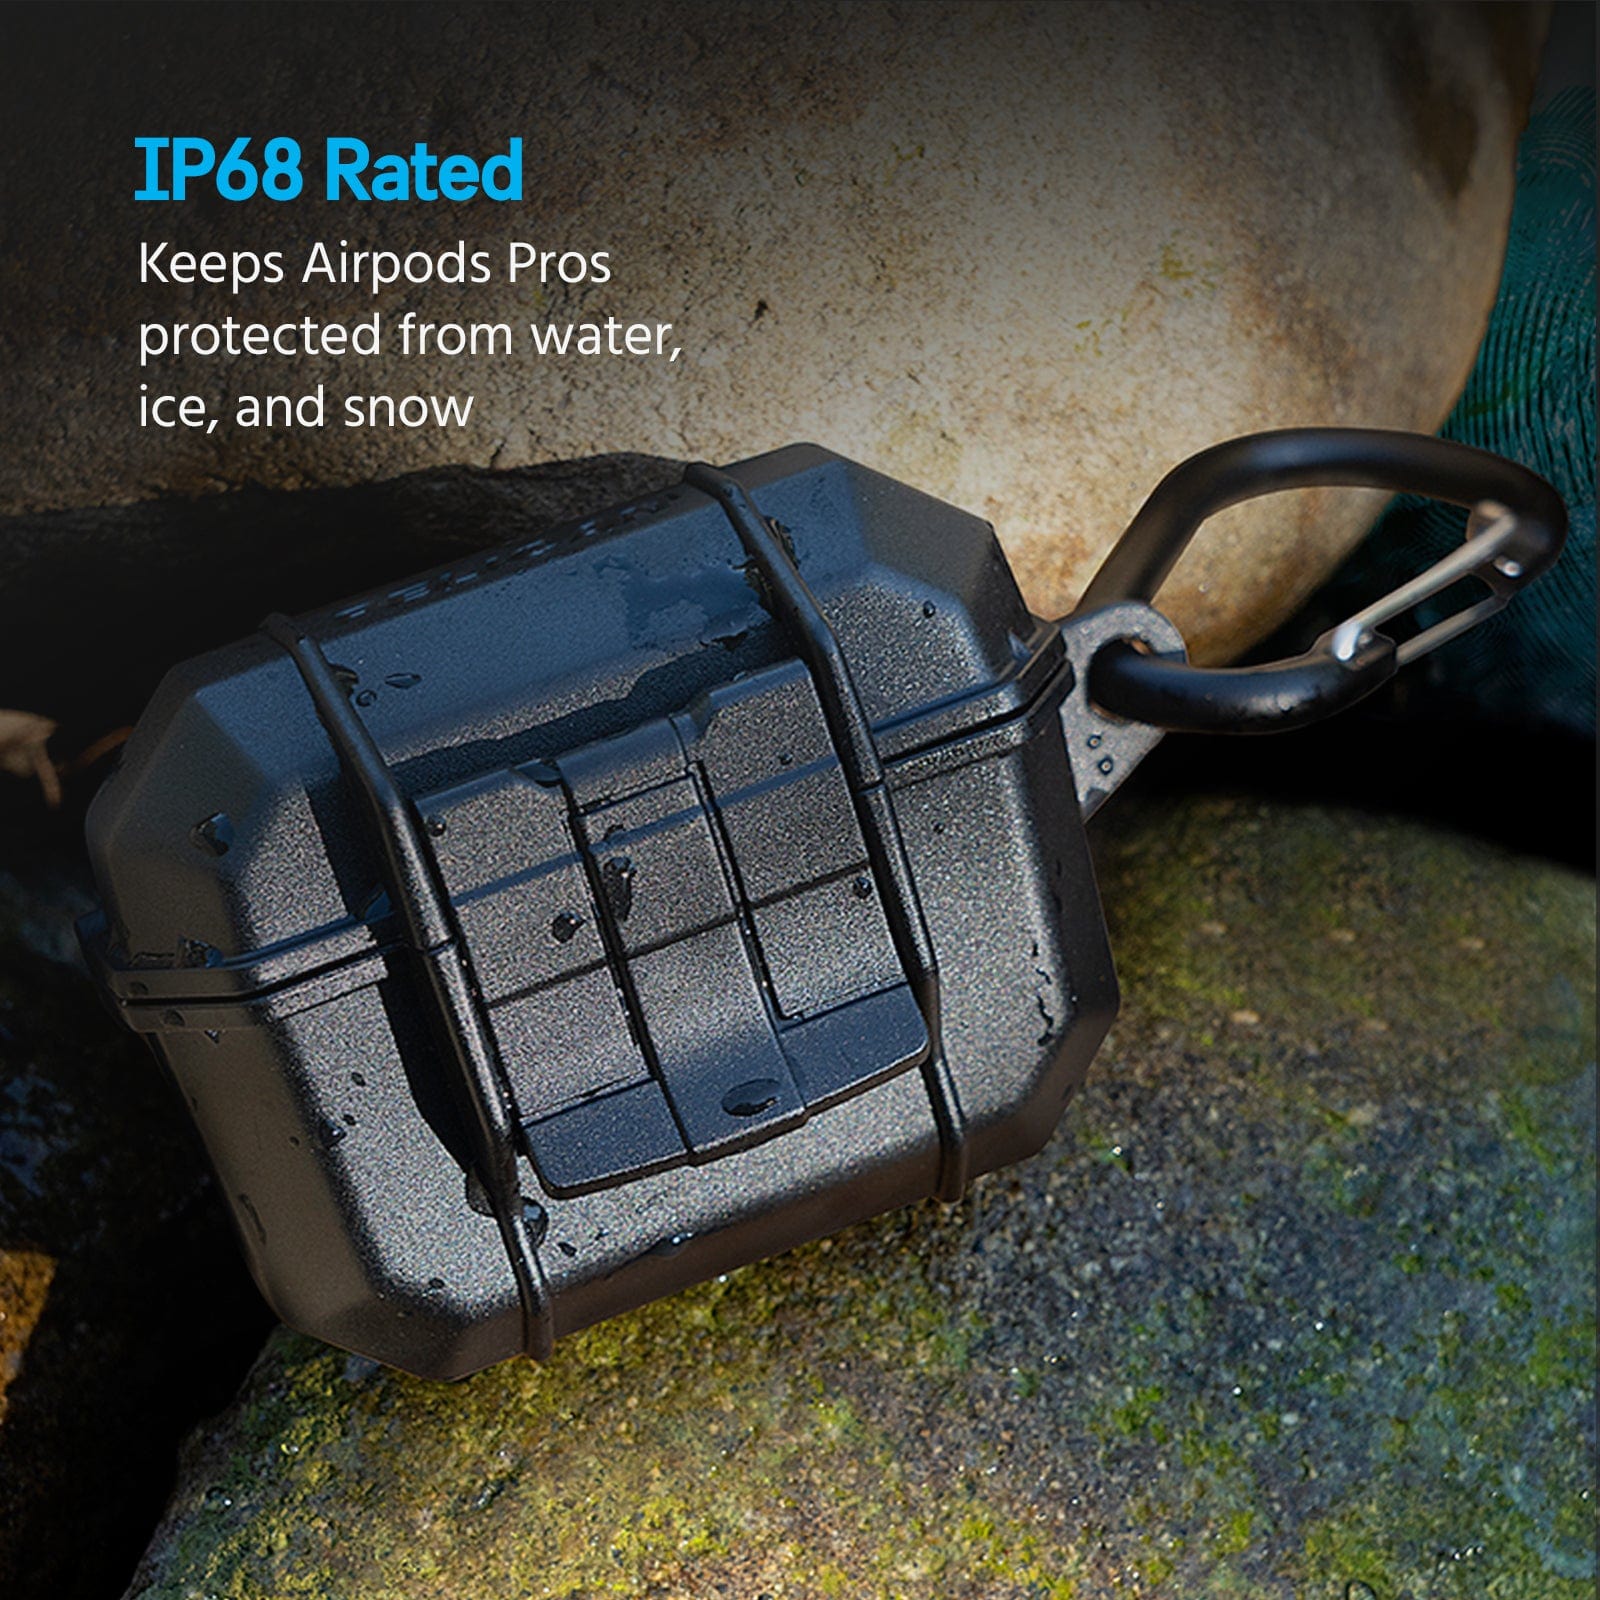 IP68 RATED. KEEP AIRPODS PROS PROTECTED FROM WATER, ICE, AND SNOW